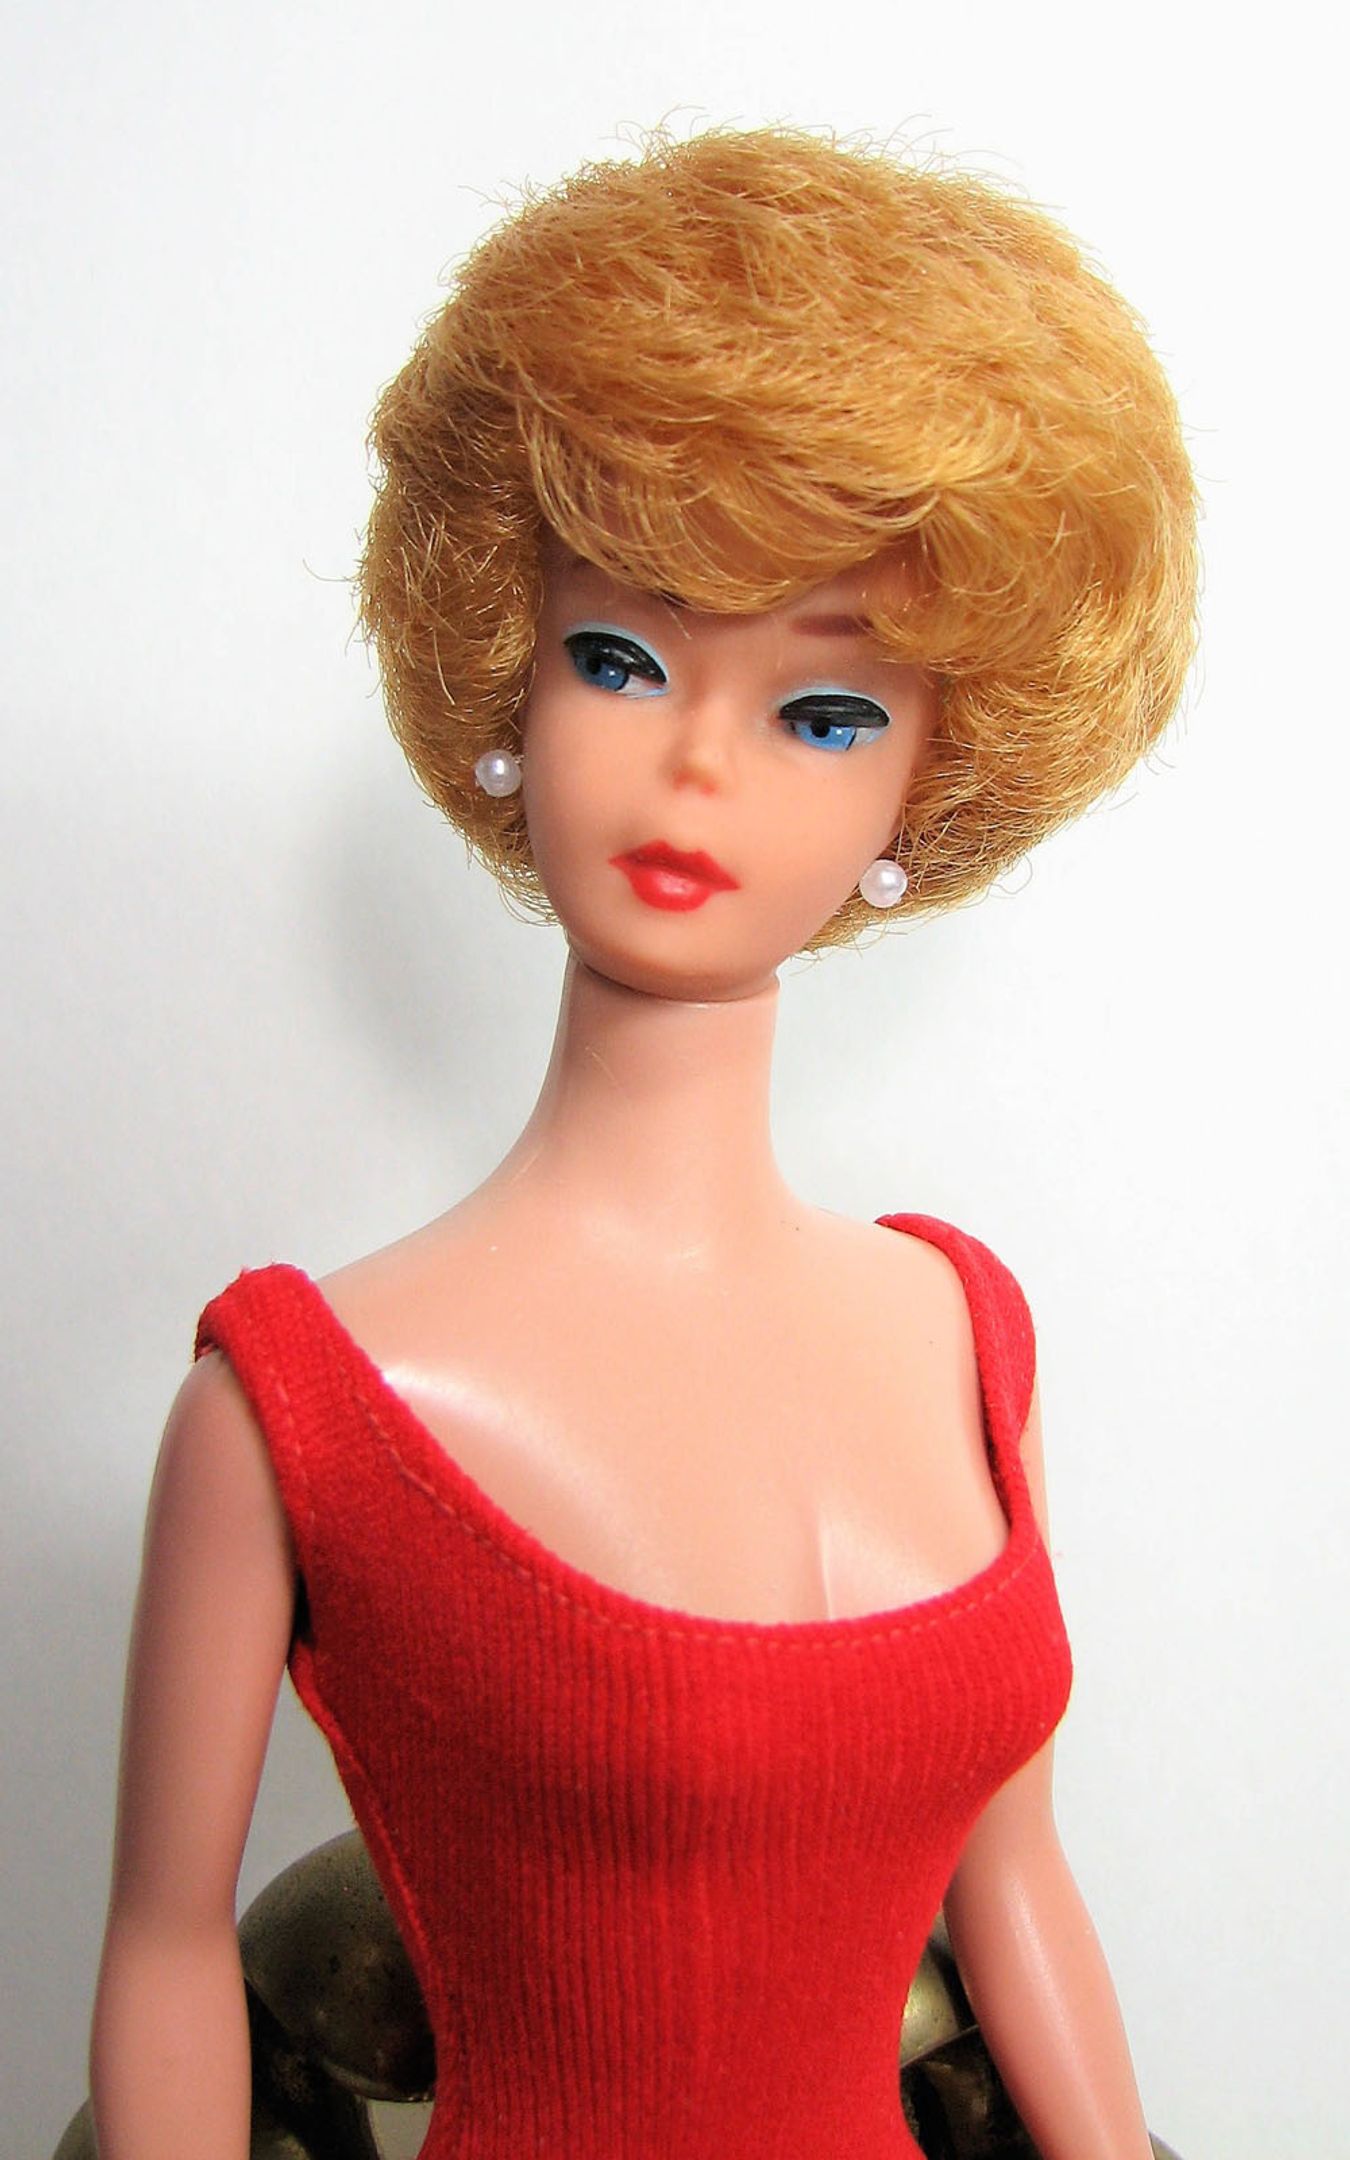 Discover Amazing of the Barbie Doll - Definition.org